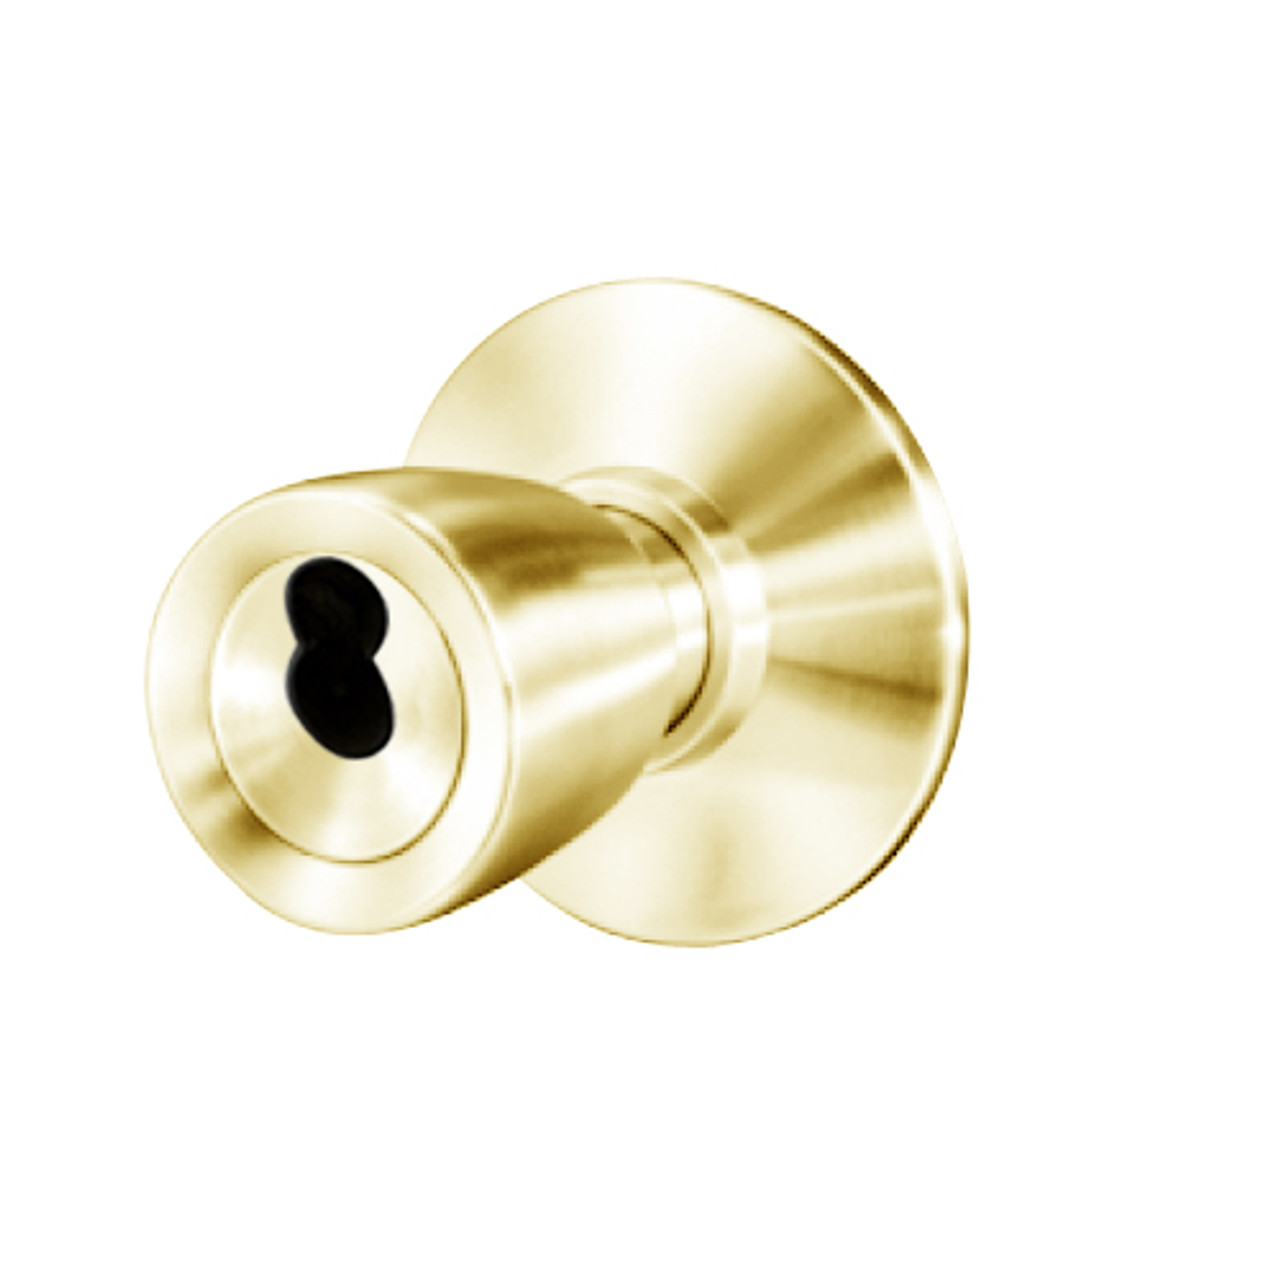 8K37AB6DS3605 Best 8K Series Entrance Heavy Duty Cylindrical Knob Locks with Tulip Style in Bright Brass